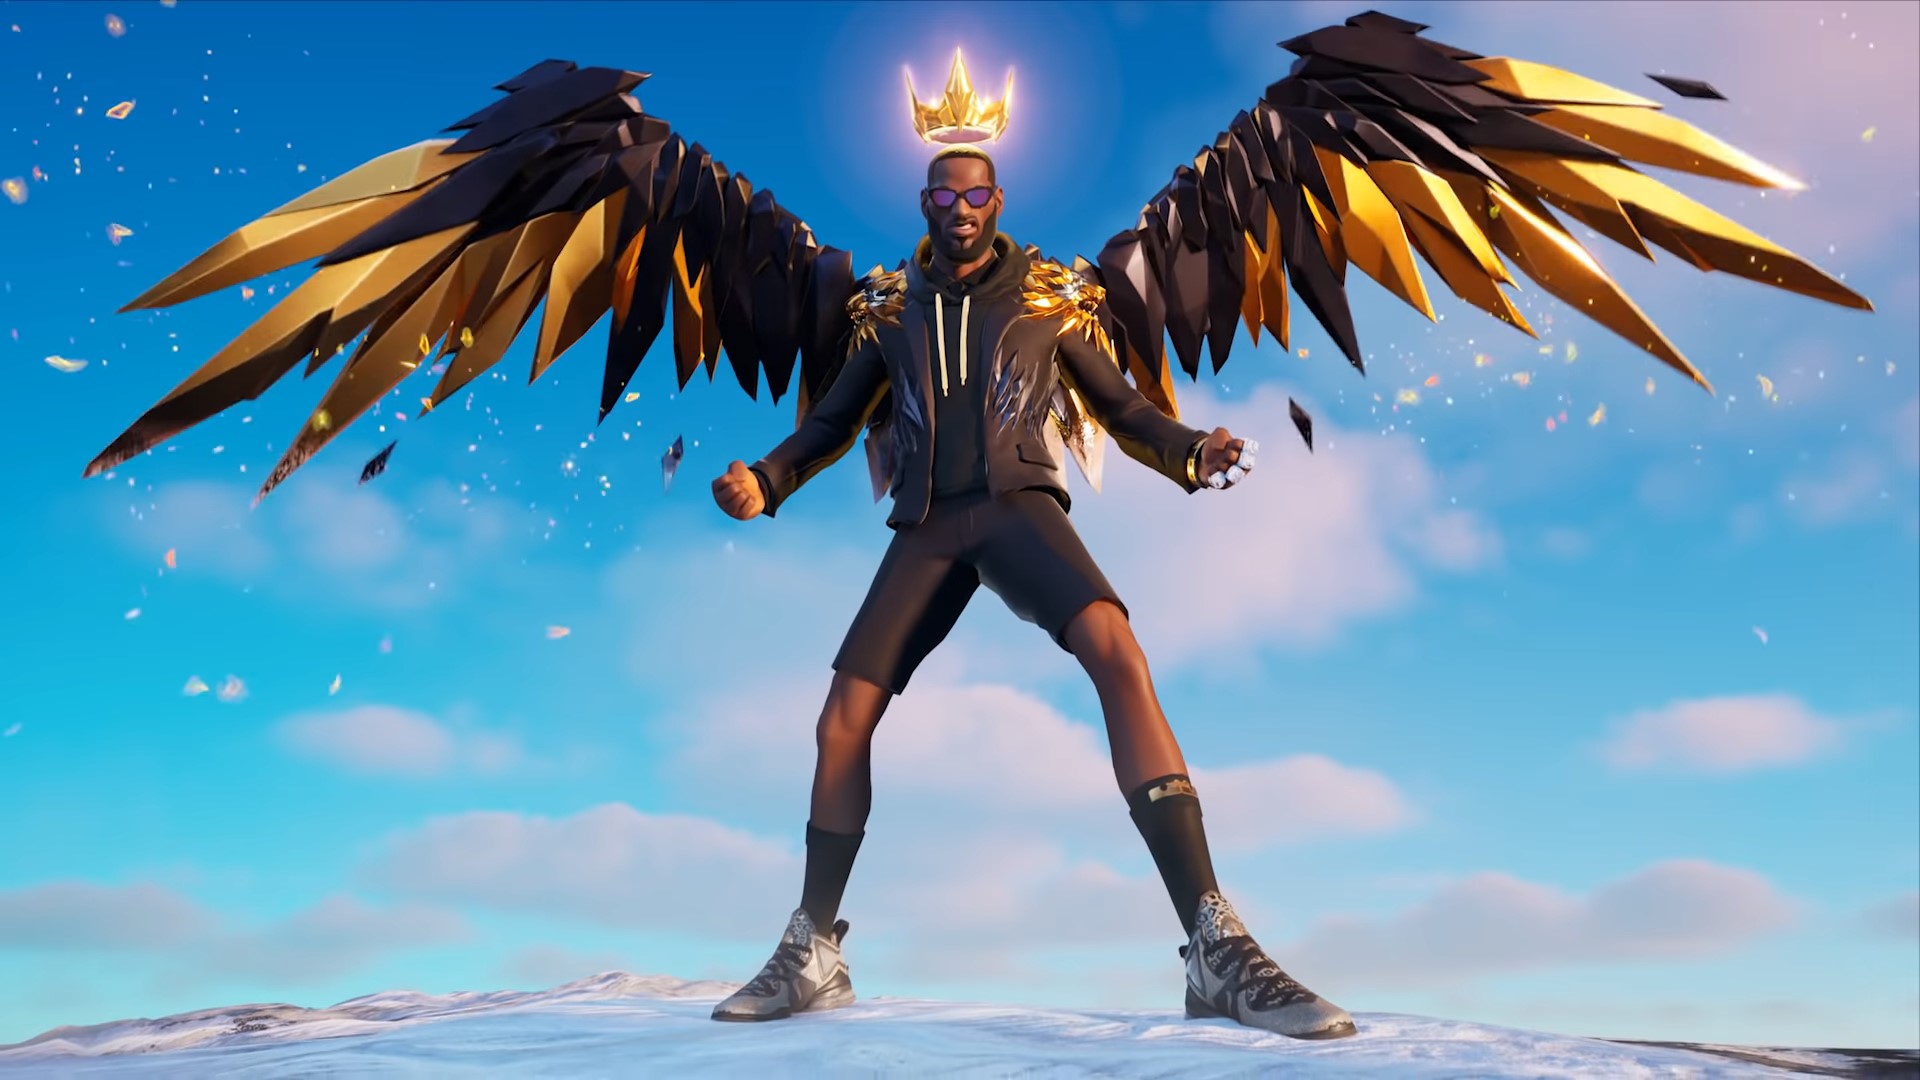 Fortnite x League of Legends collaboration for Chapter 2 Season 8